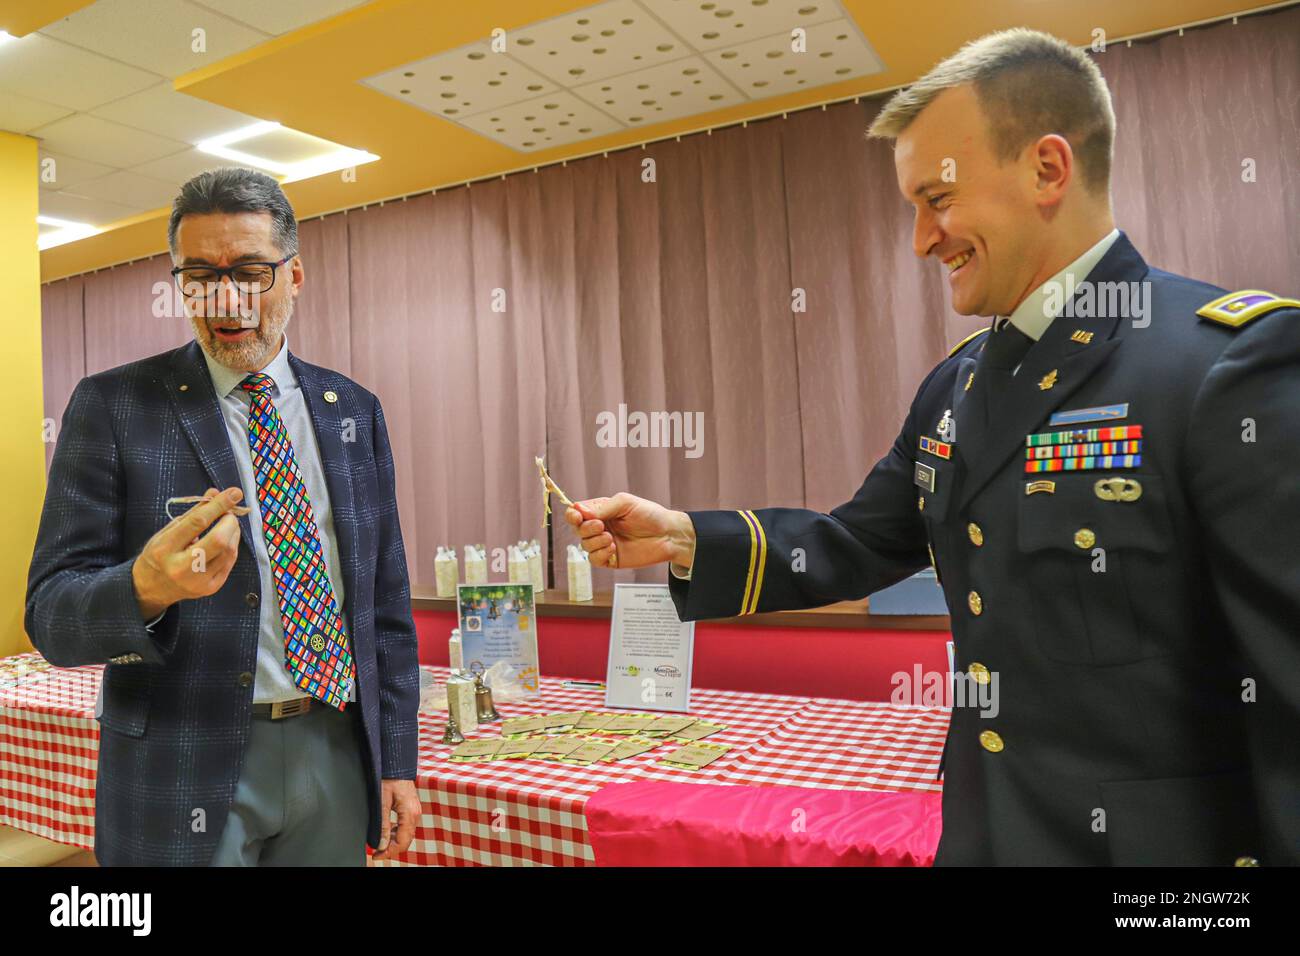 MARTIN, Slovakia - President of Rotary Club International Martin, Ivan Lamos, looks down at his half of the broken turkey wishbone as U.S. Army V Corps Maj. Steve Szrom, a Civil Affairs officer from Valparaiso, Indiana, holds his half after participating in the Thanksgiving tradition at the end of Rotary International Club Martin’s Thanksgiving dinner, Martin, Slovakia, Nov. 24, 2022. Local community leaders representing the Rotary International Club invited U.S. Army V Corps Civil Affairs Soldiers from Camp Kosciuszko, Poland, to a Thanksgiving event to further promote, understand and celebra Stock Photo